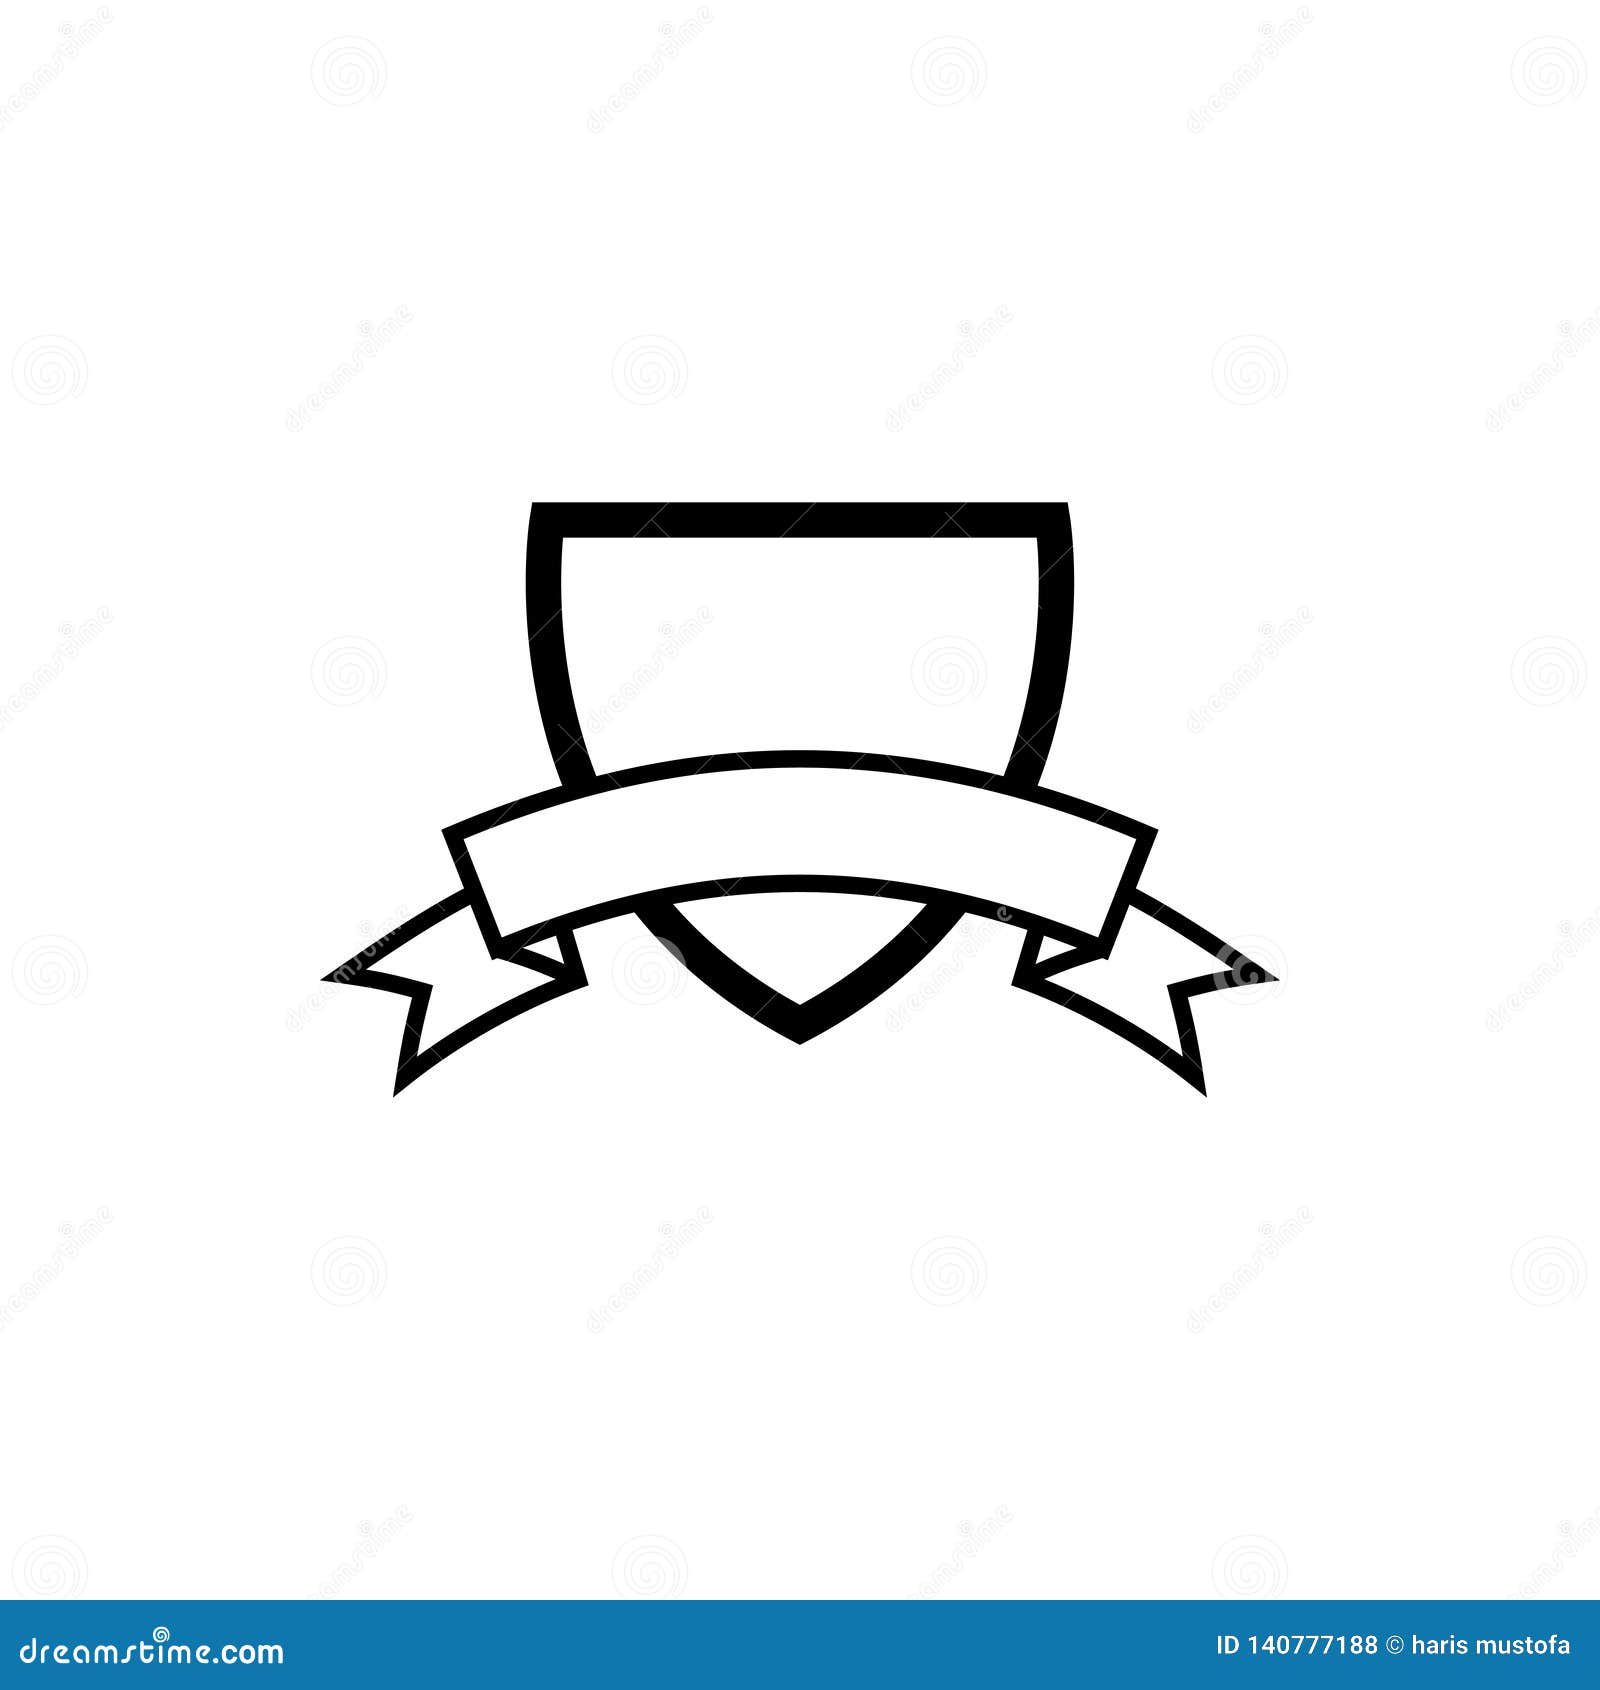 Shield shape with ribbon - Free shapes icons